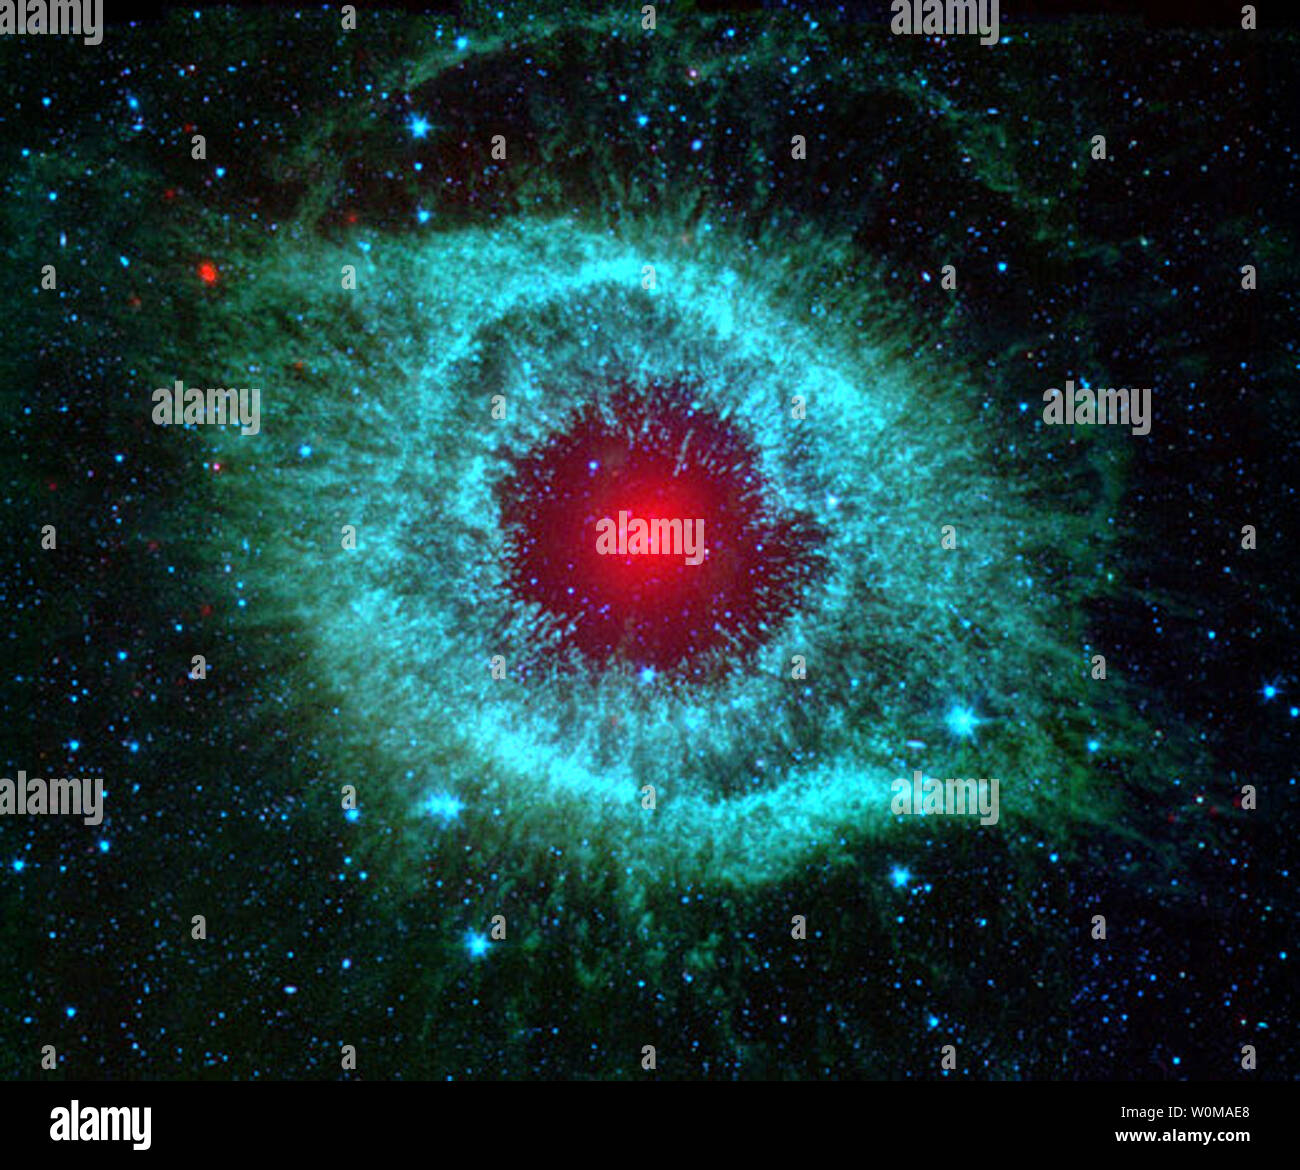 This undated infrared image from NASA's Spitzer Space Telescope shows the Helix nebula located 700 light-years away from Earth. The nebulae is the remains of a dieing, similar to the Sun, whose gaseous layers are expanding outward. (UPI Photo/NASA/JPL-Caltech/Univ.of Ariz) Stock Photo